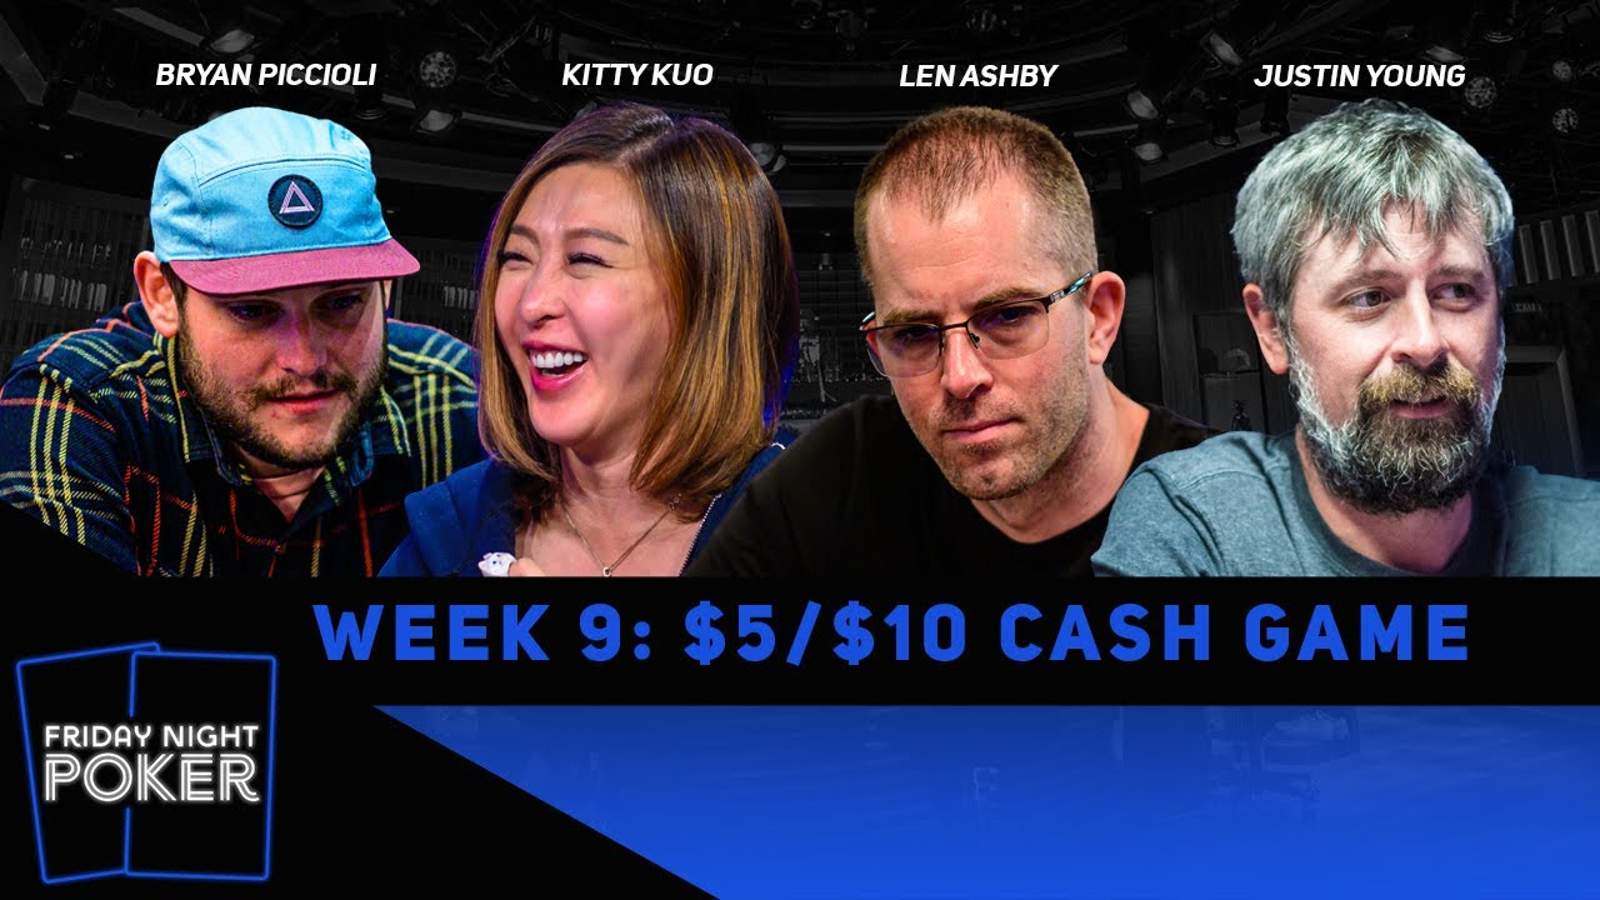 Rewatch Week 9 of Friday Night Poker on YouTube and Facebook